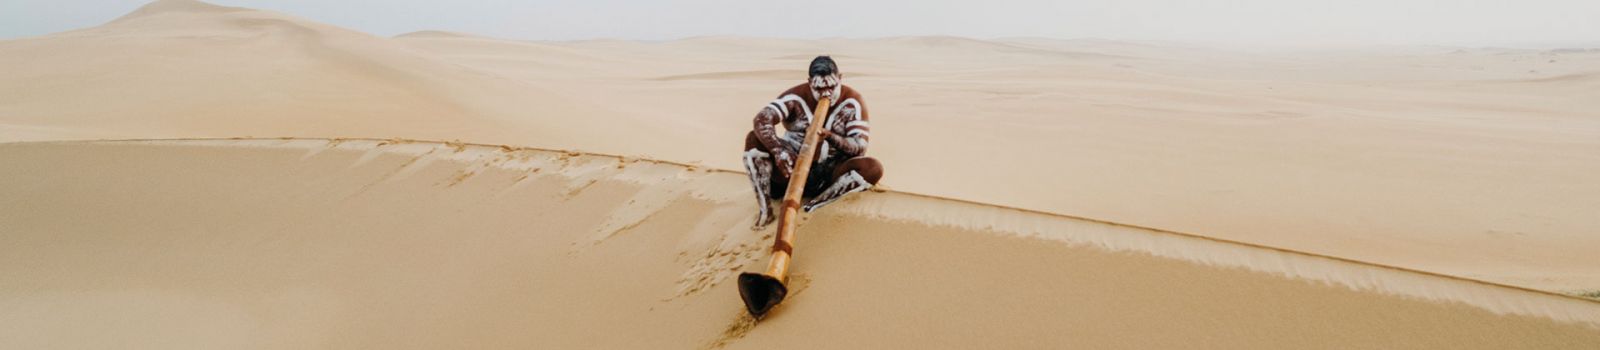 Image of an Aboriginal man playing a didgeridoo in the sand dunes banner image